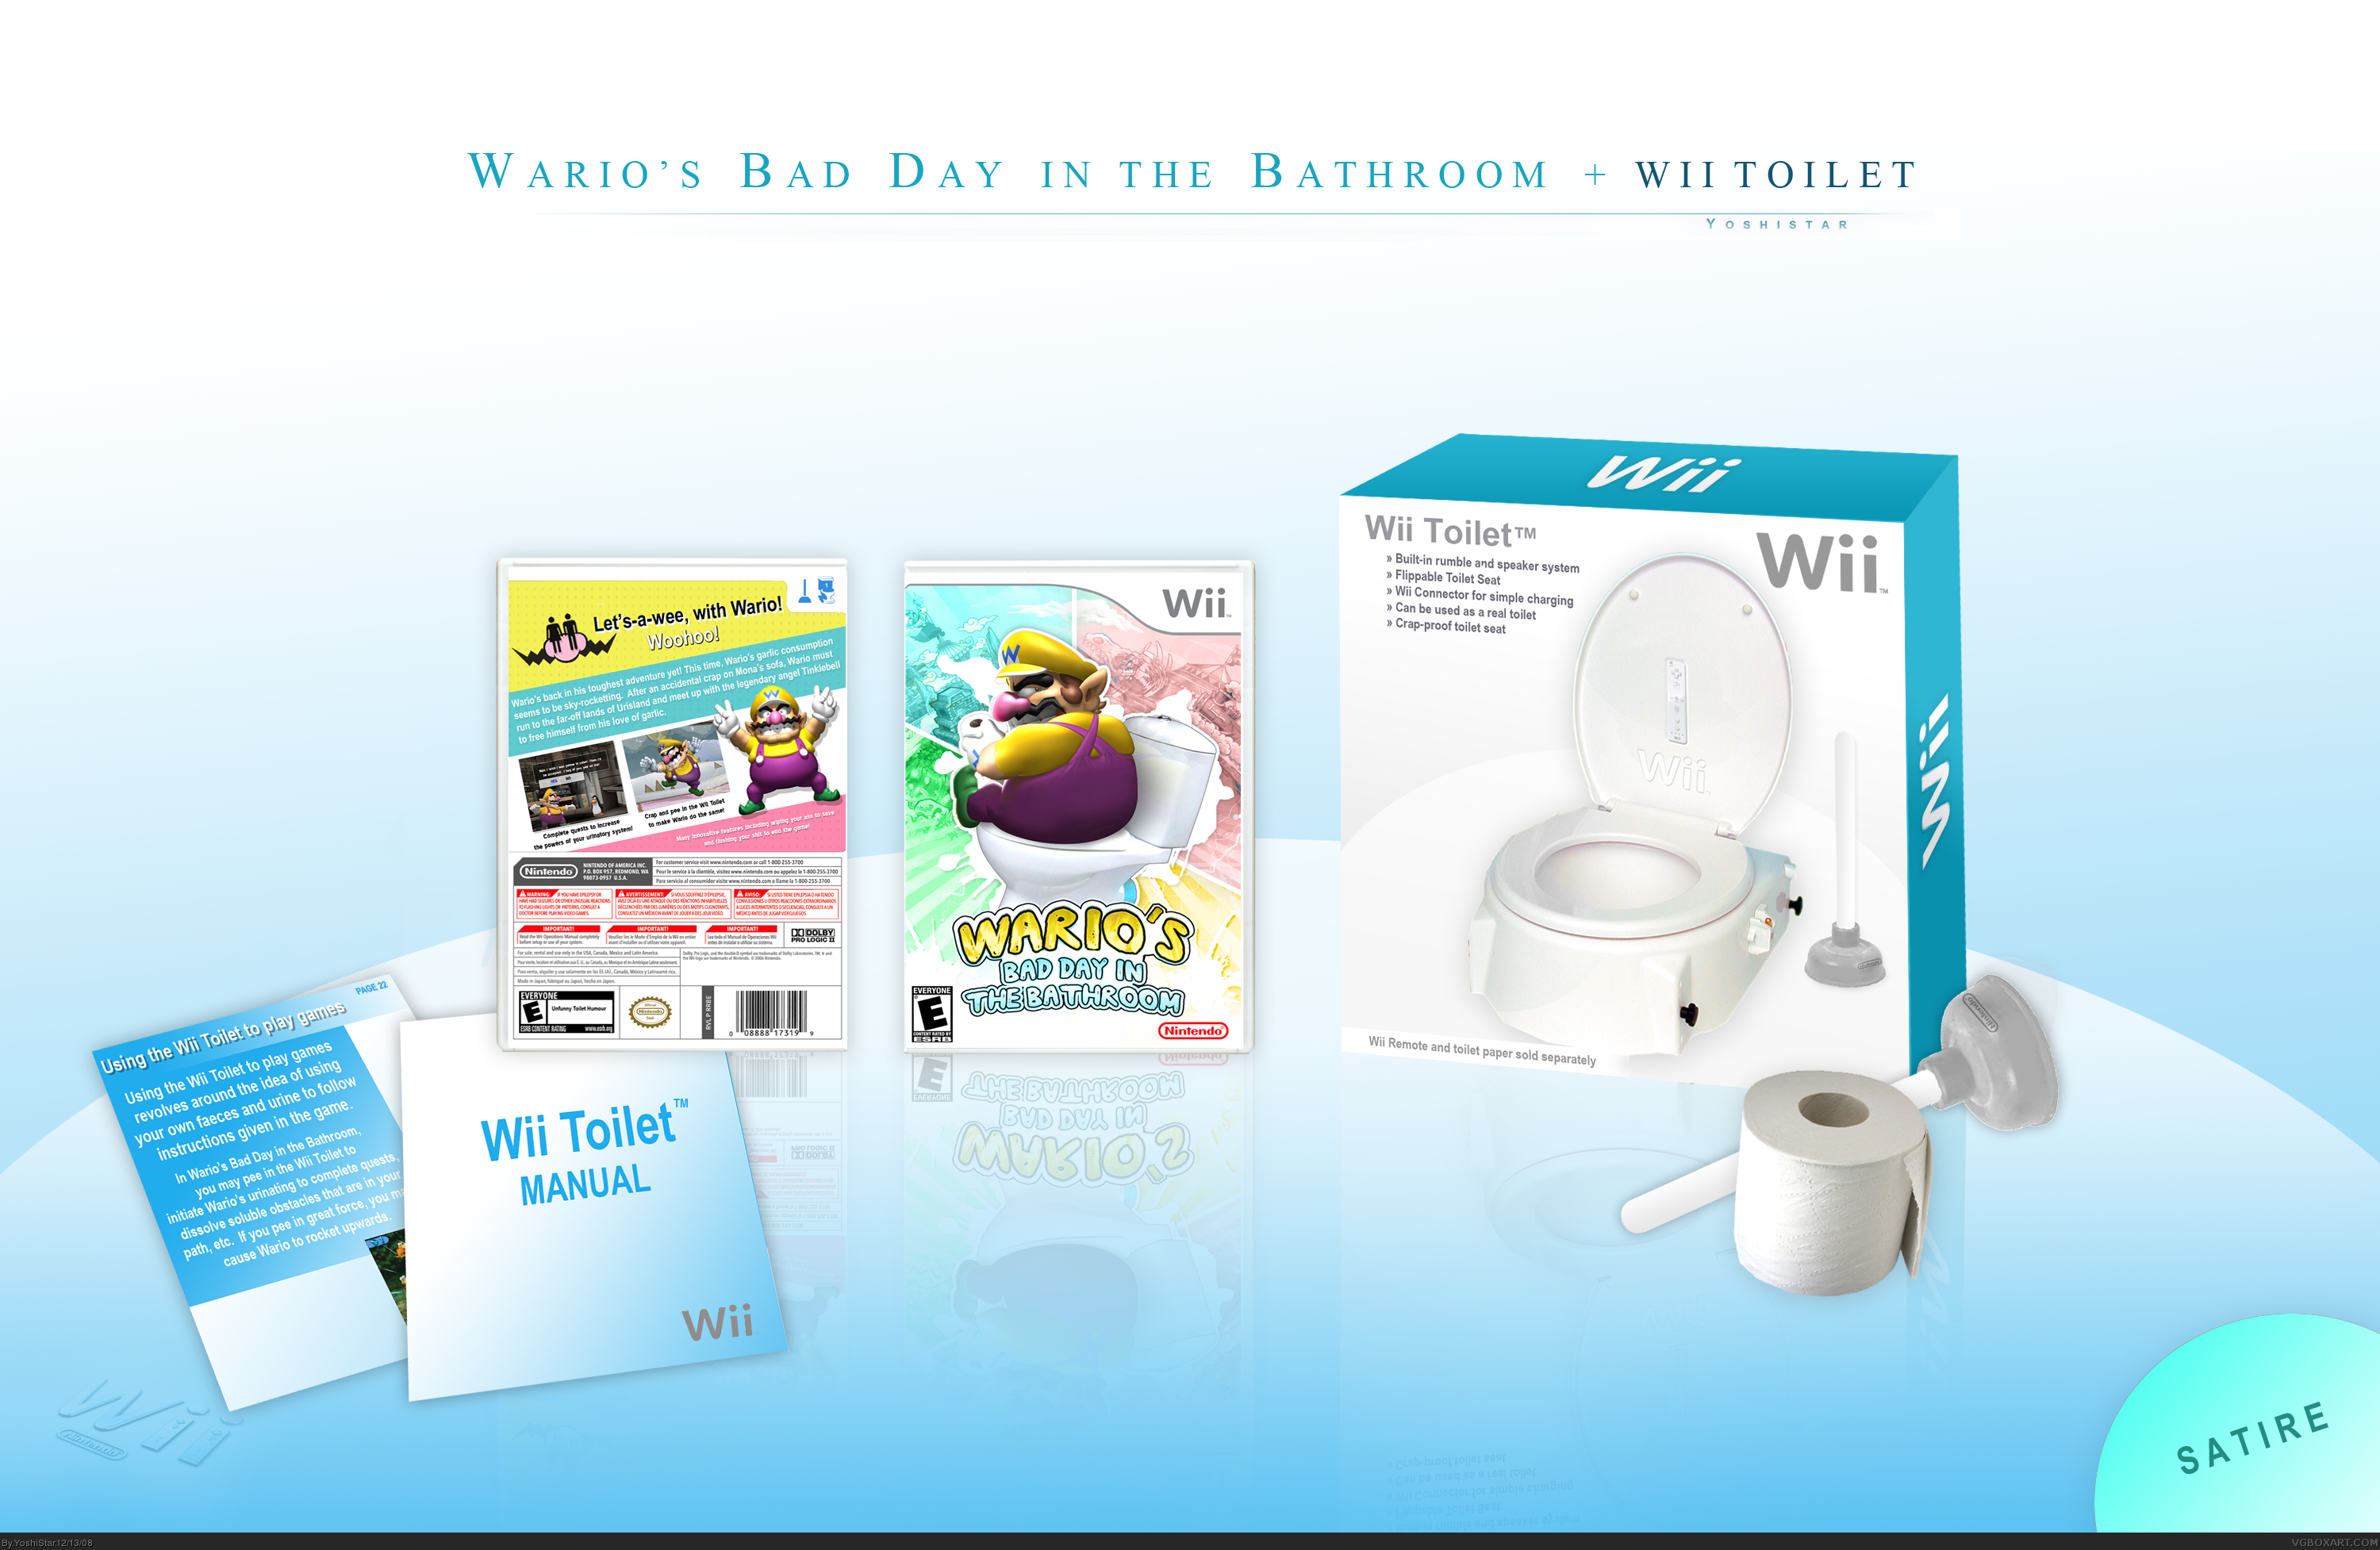 Wario's Bad Day in the Bathroom + Wii Toilet box cover